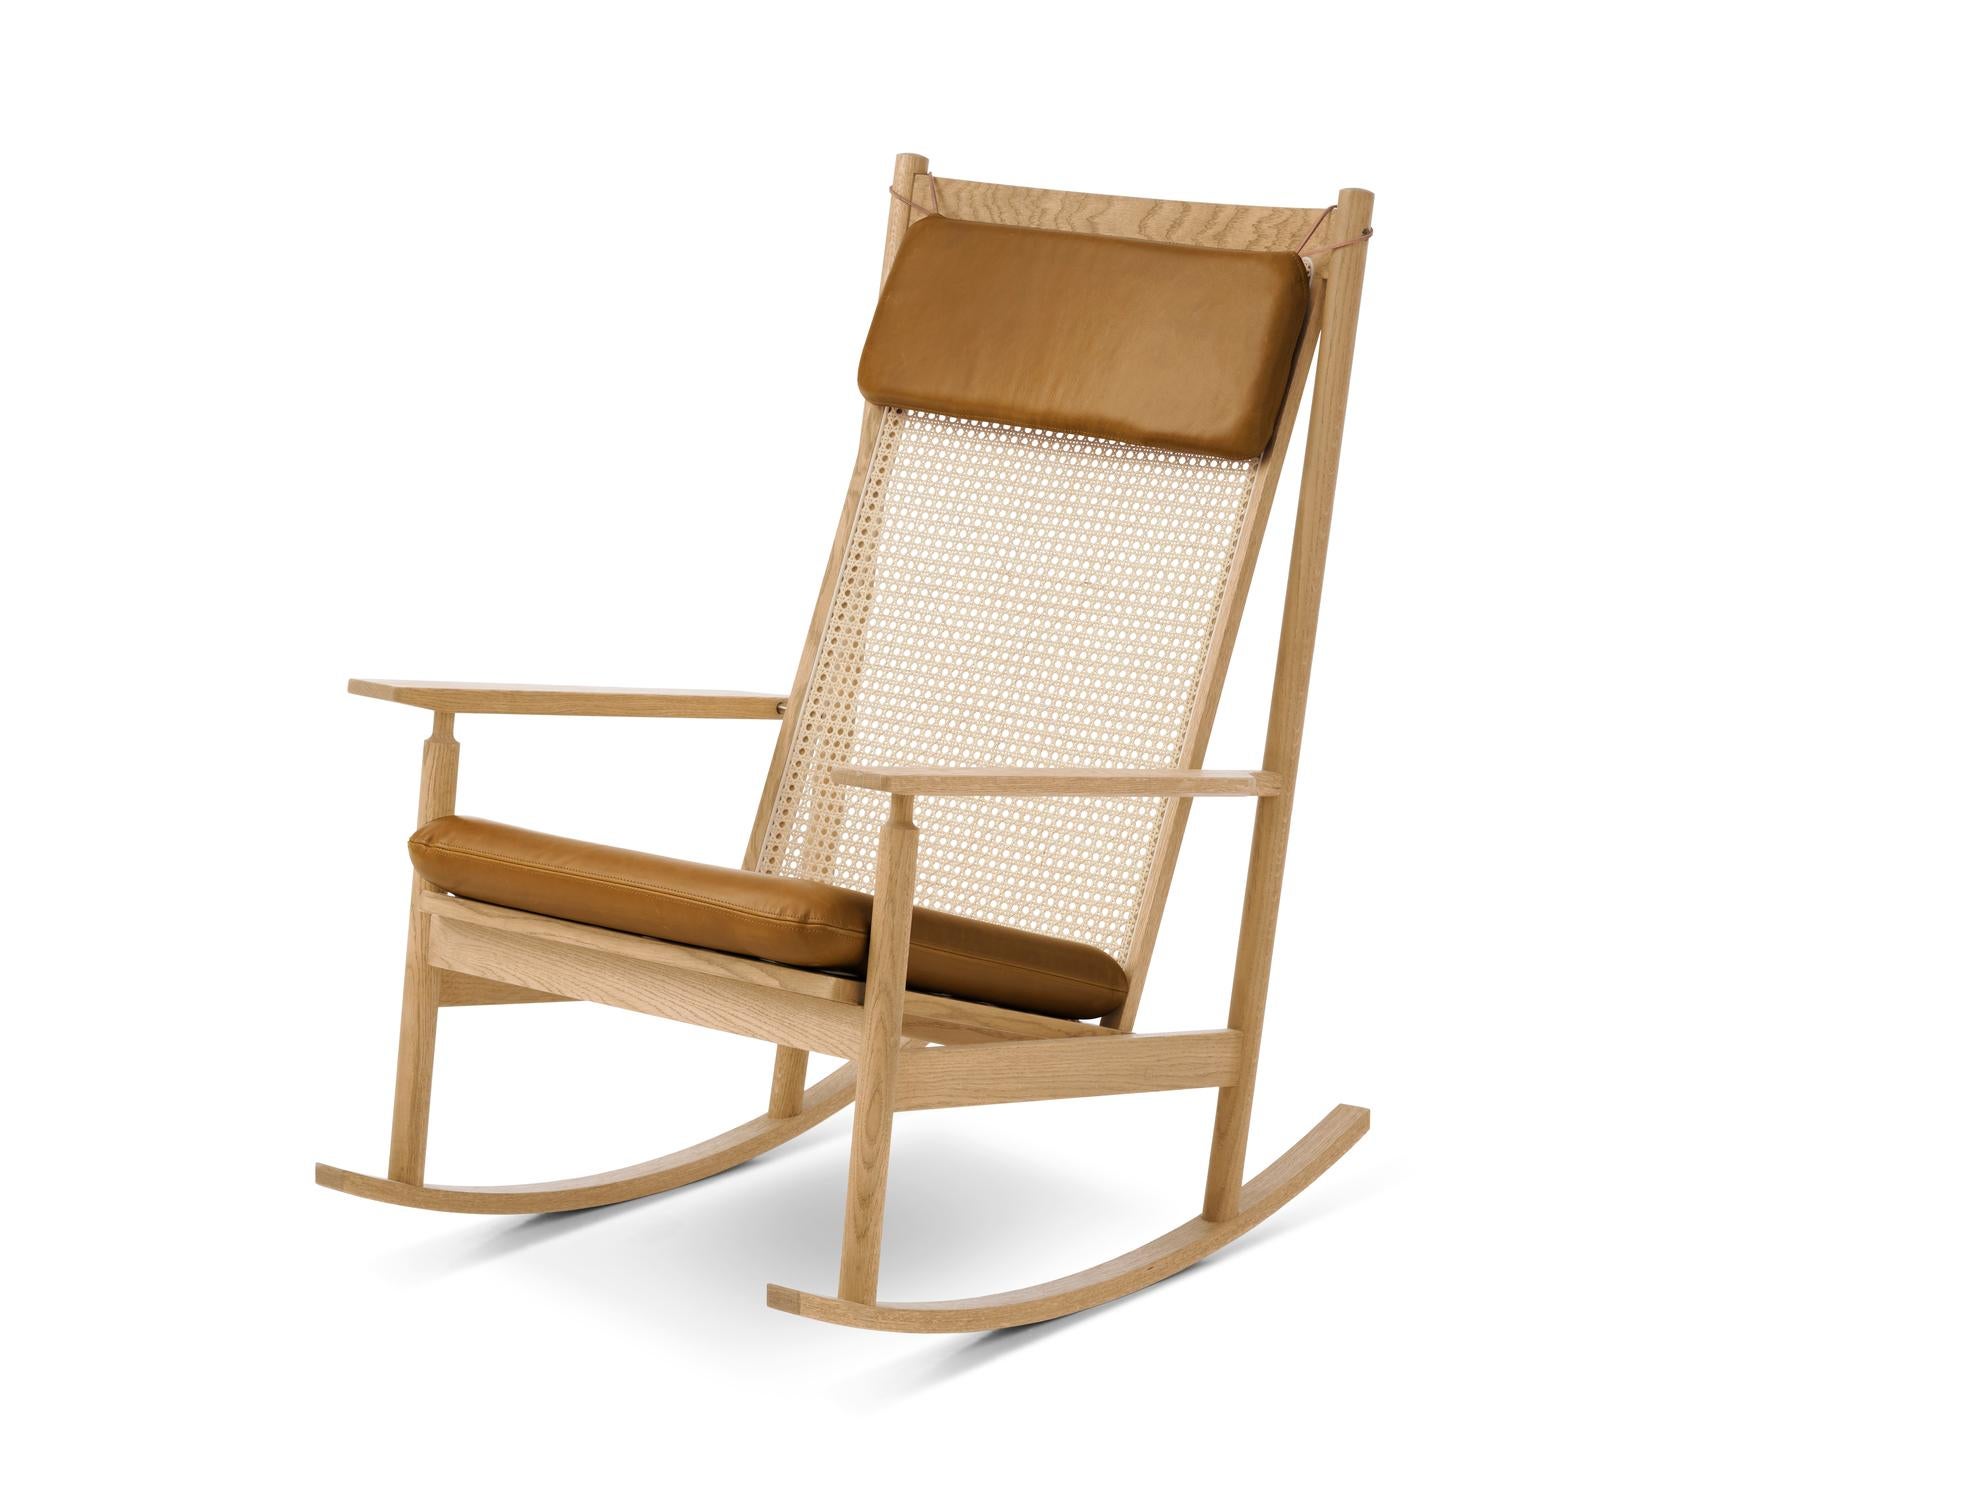 Swing Rocking chair Nevada Oak Cognac by Warm Nordic
Dimensions: D91 x W68 x H 103 cm
Material: Wood, Foam, Rubber springs, French cane, Textile or leather upholstery, Oak
Weight: 16.5 kg
Also available in different colours, materials and